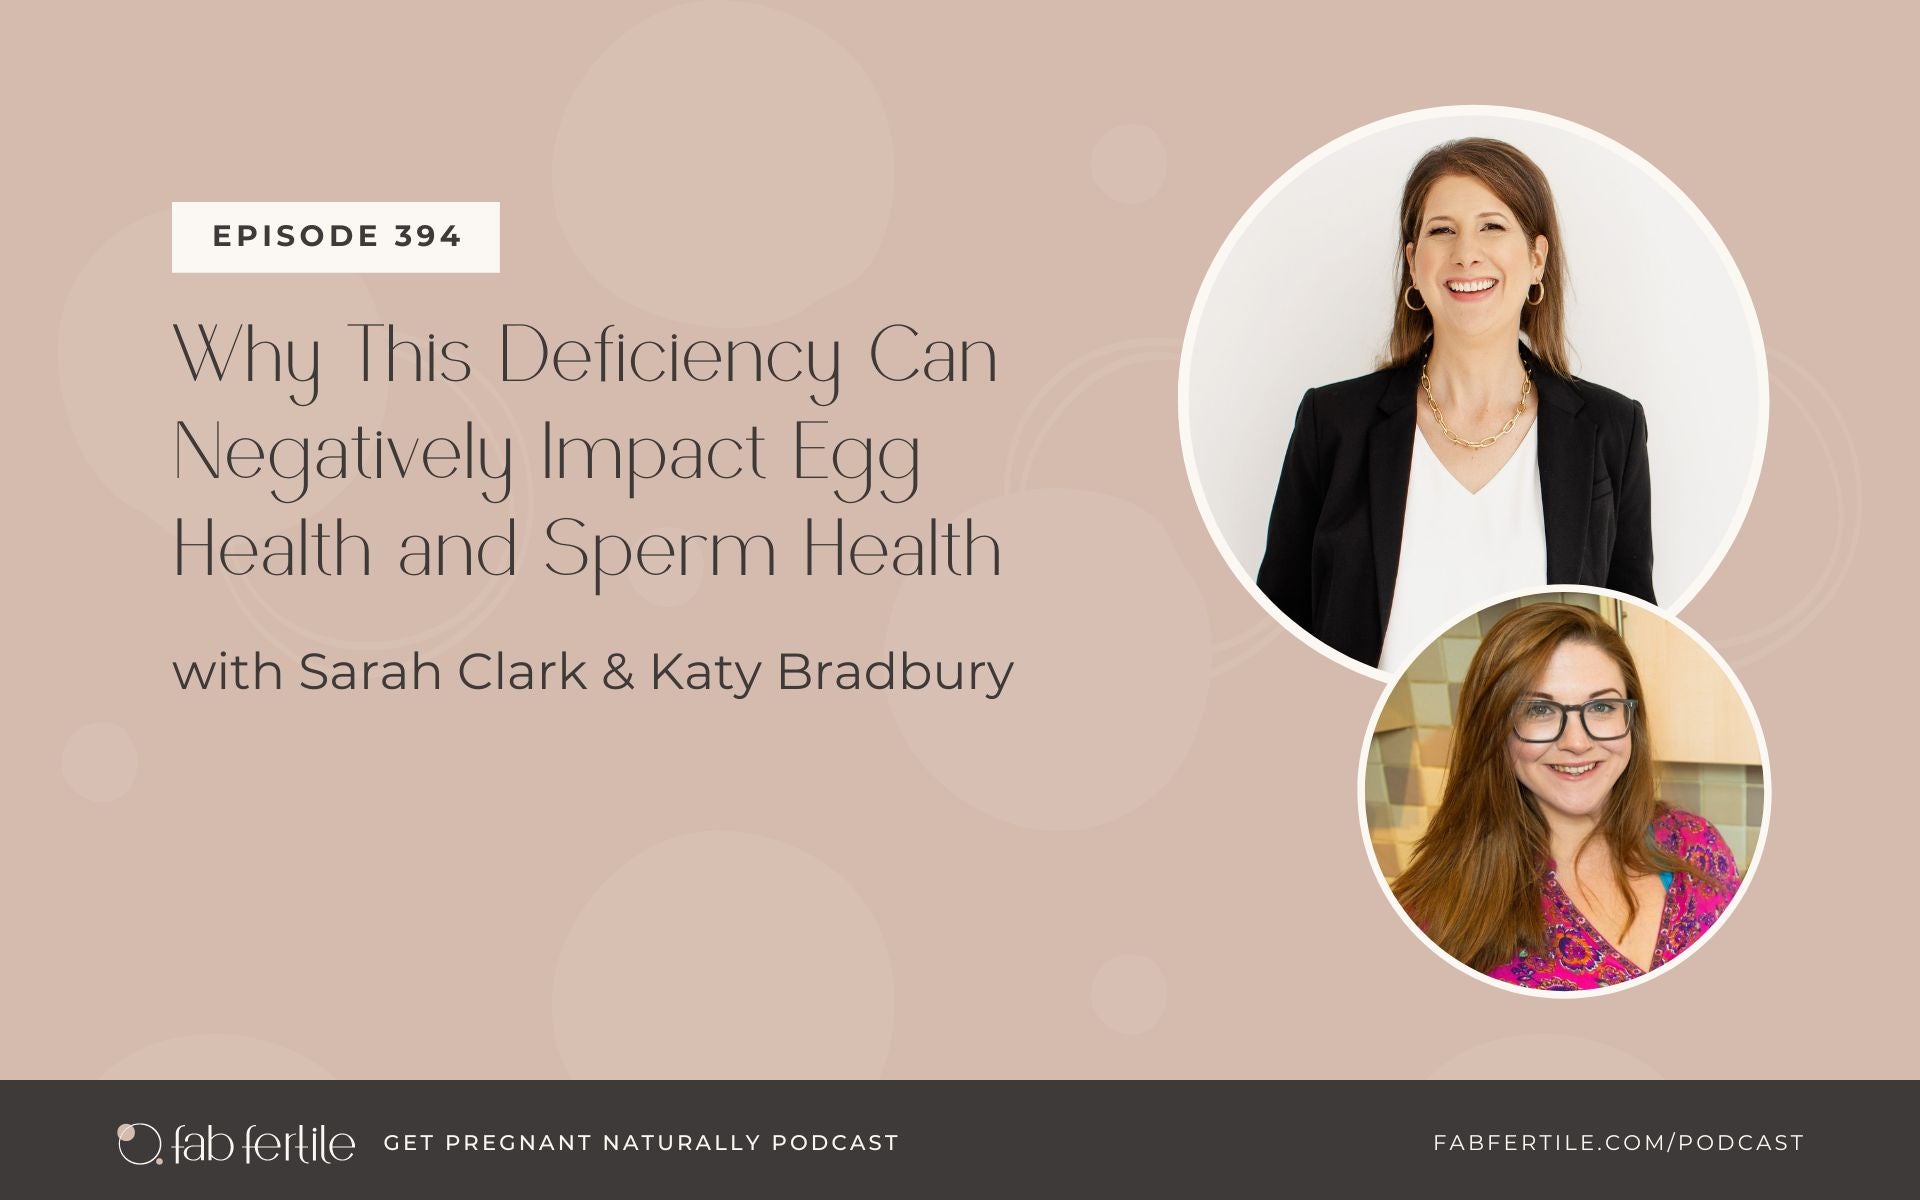 Why This Deficiency Can Negatively Impact Egg Health and Sperm Health